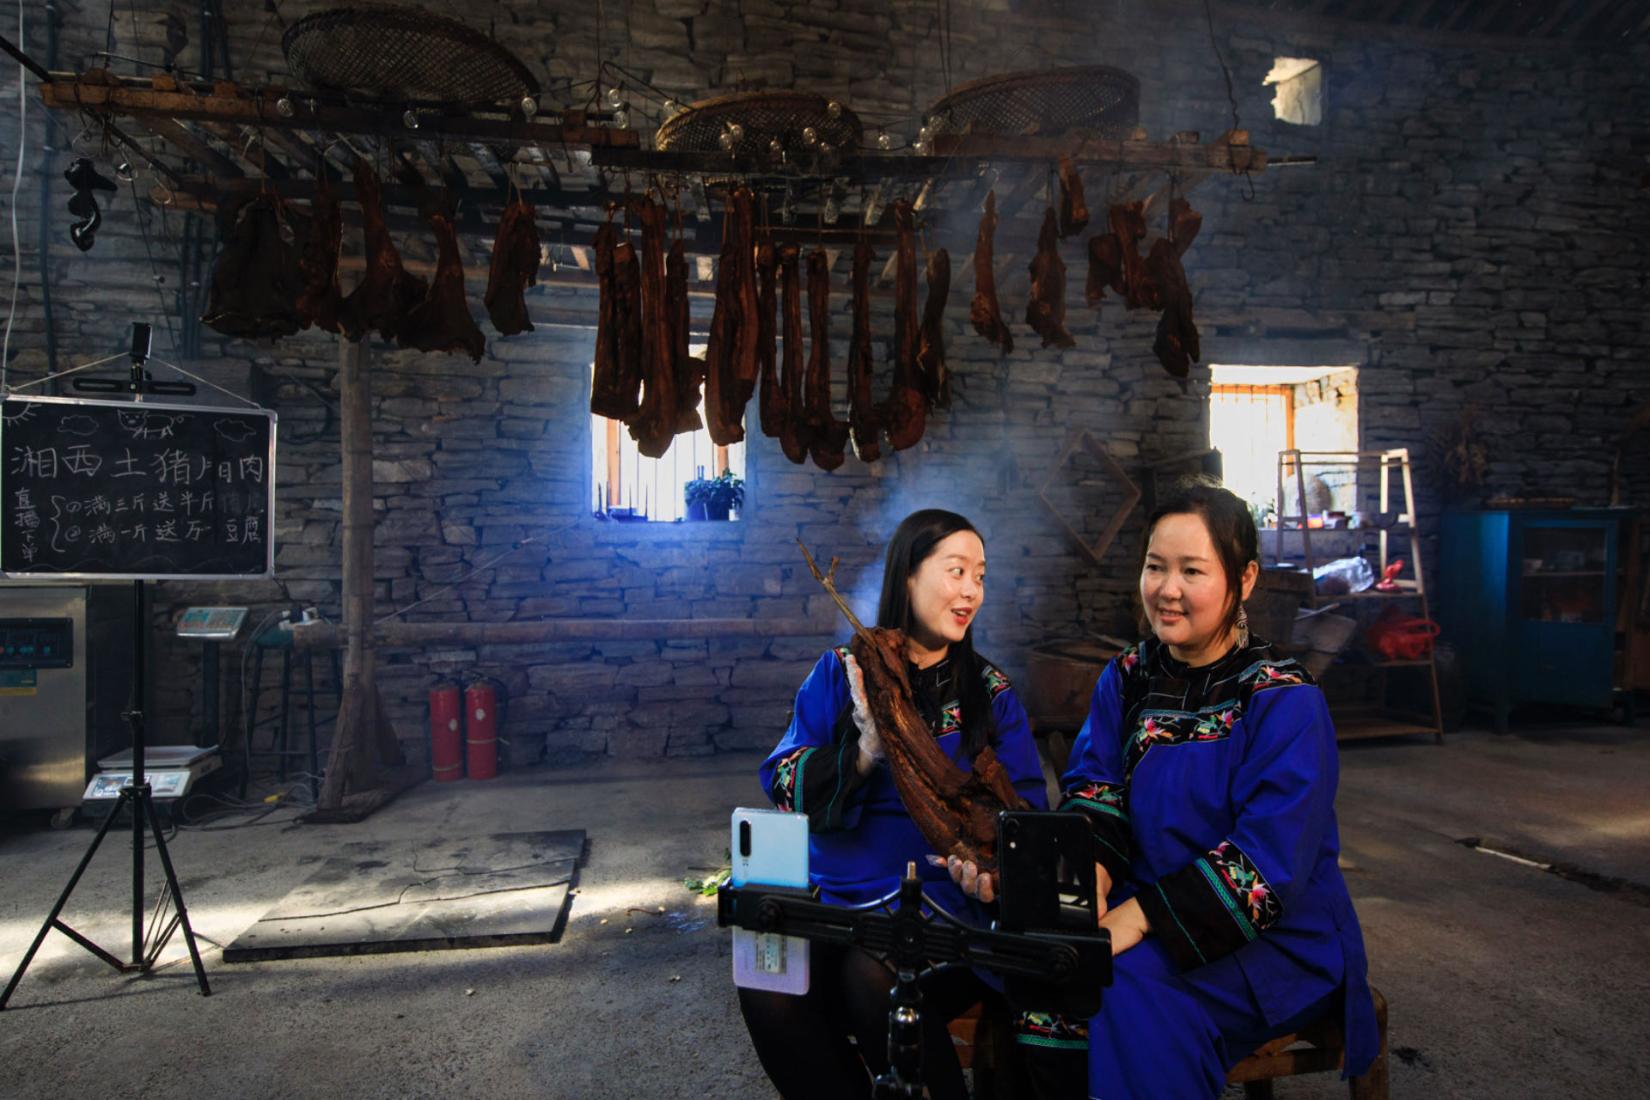 Jinyou (right) and a fellow villager livestream in rural Fenghuang County, China.